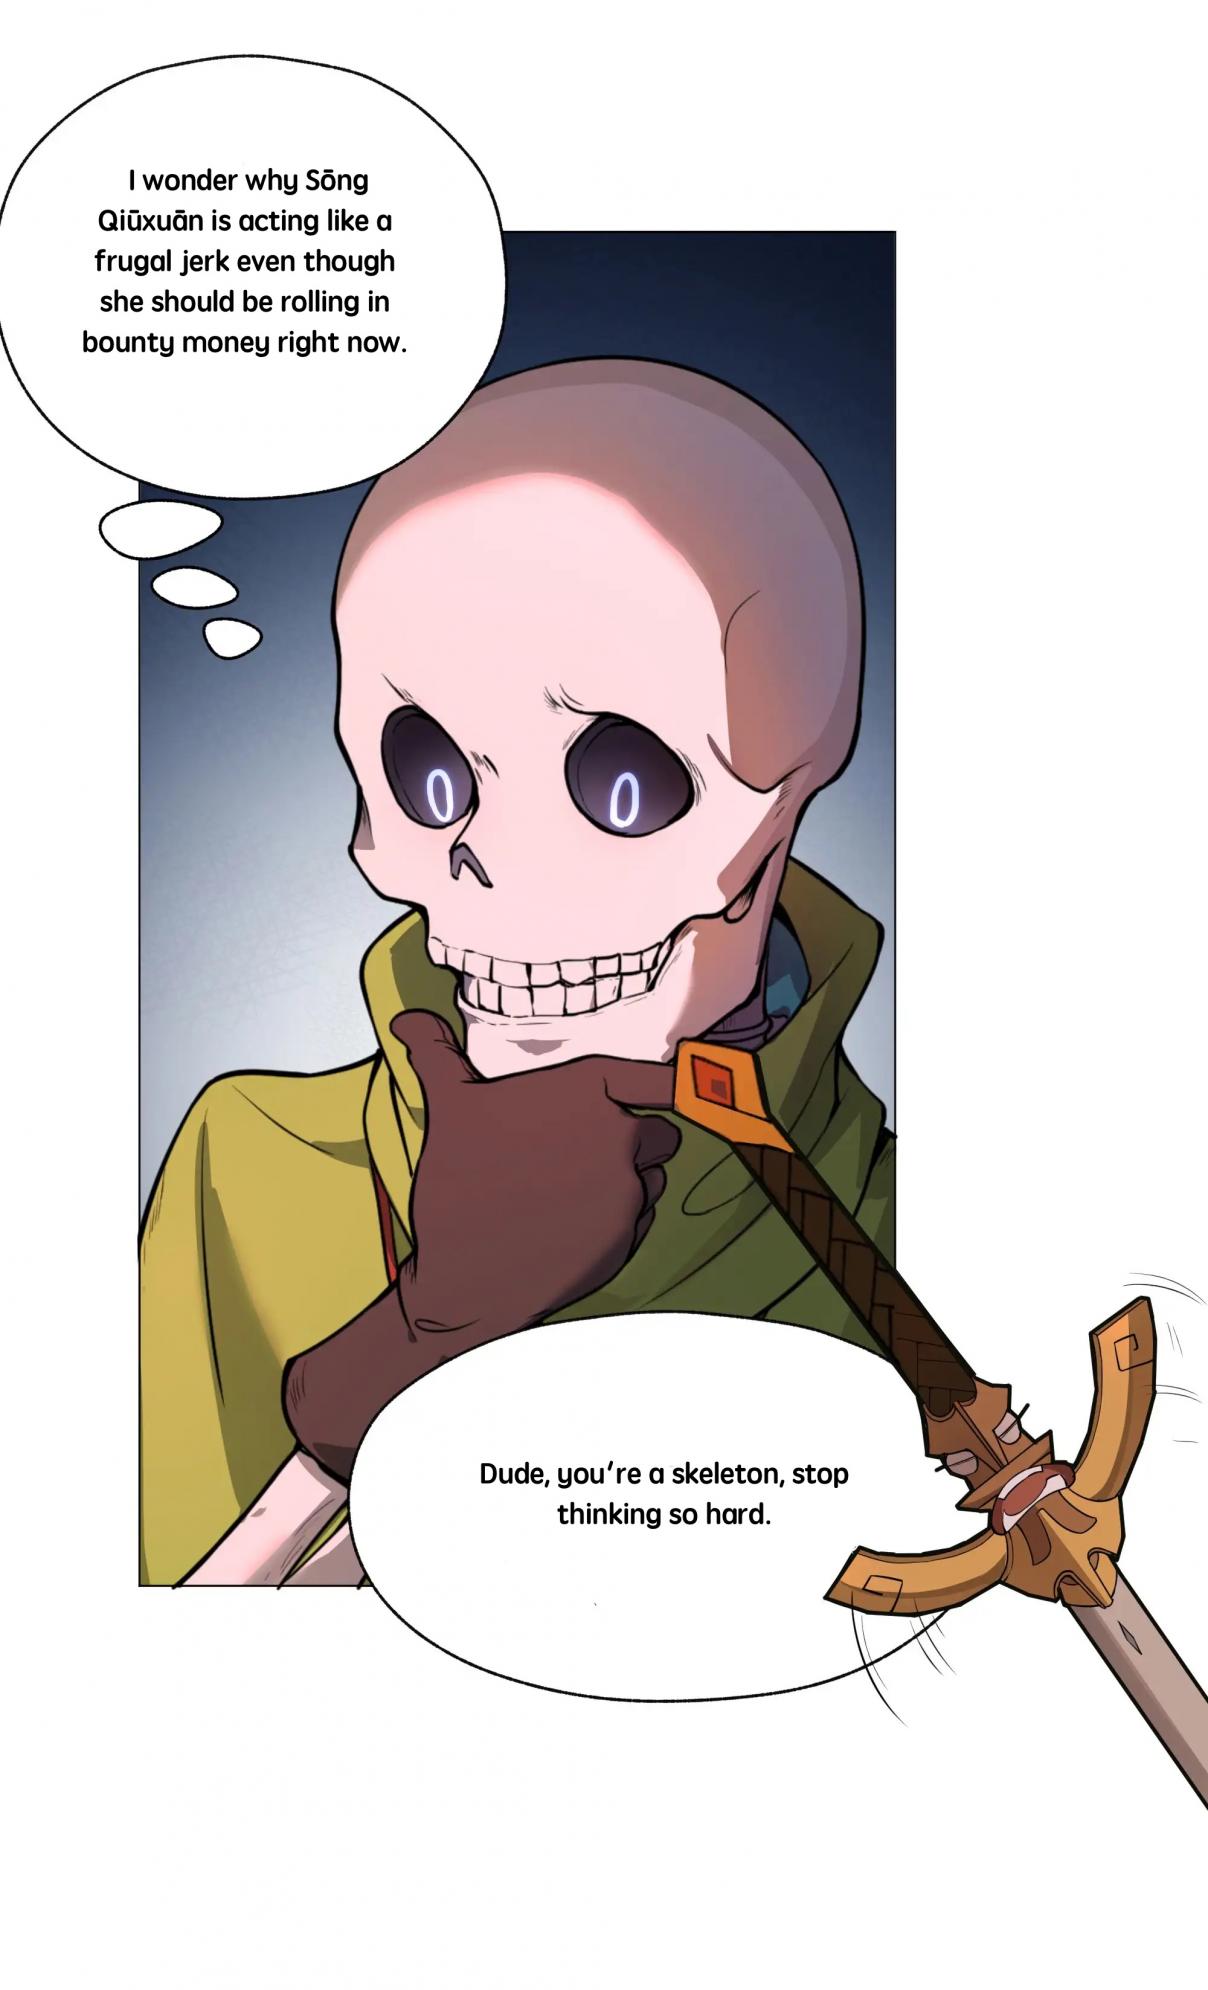 Little Skeleton Ch. 6 Getting straight to the point is a good quality!